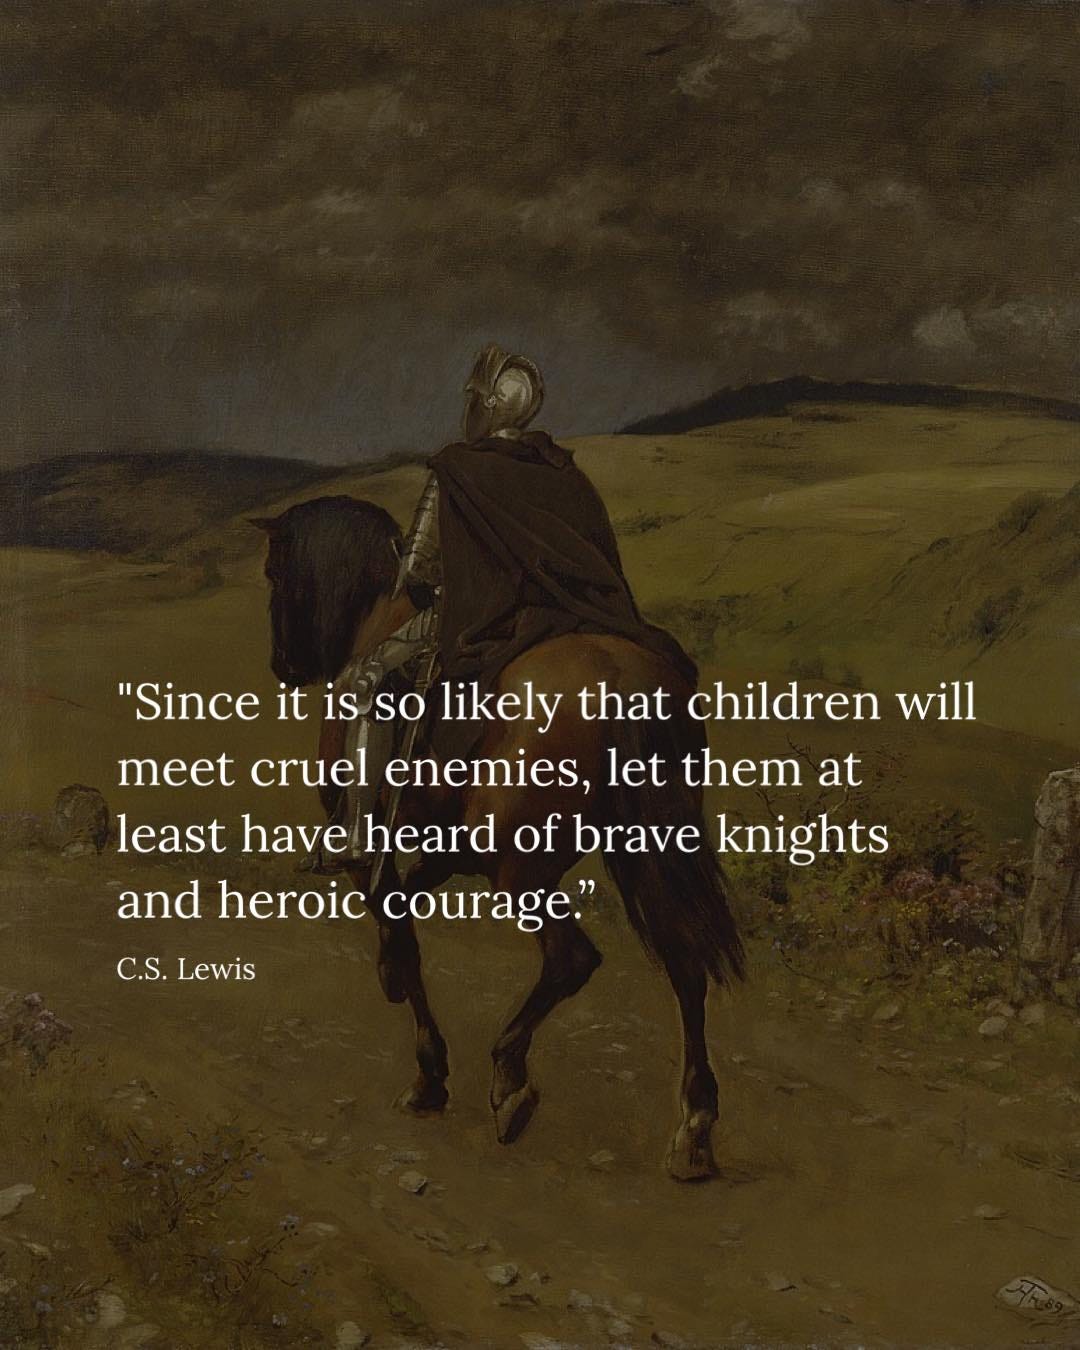 May be an image of text that says '"Since it is so likely that children will meet cruel enemies, let them at least have heard of brave knights and heroic courage." C.S. Lewis'